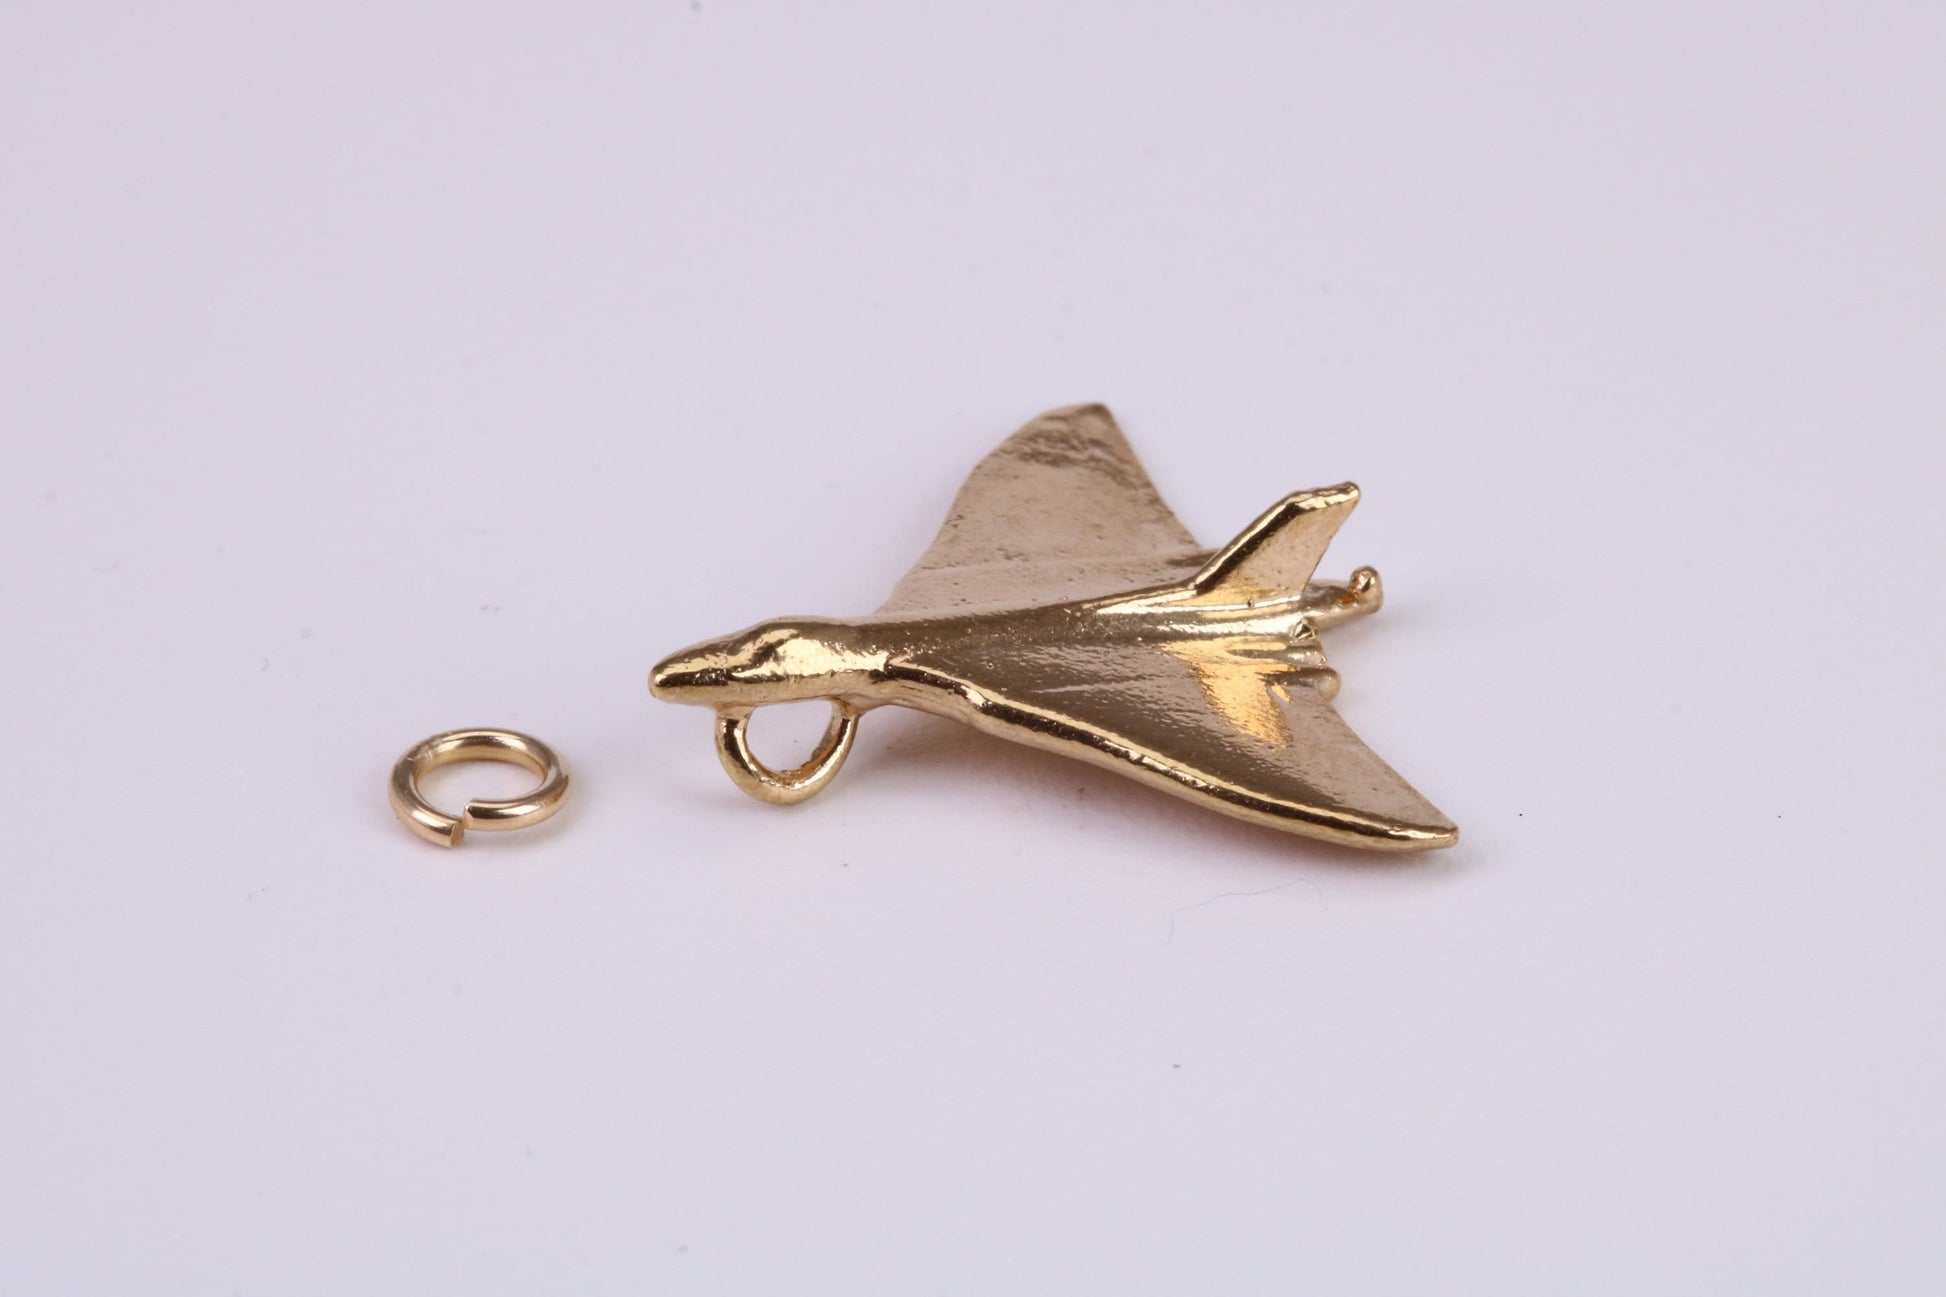 Vulcan Bomber Airplane Charm, Traditional Charm, Made From Solid Yellow Gold with British Hallmark, Complete with Attachment Link